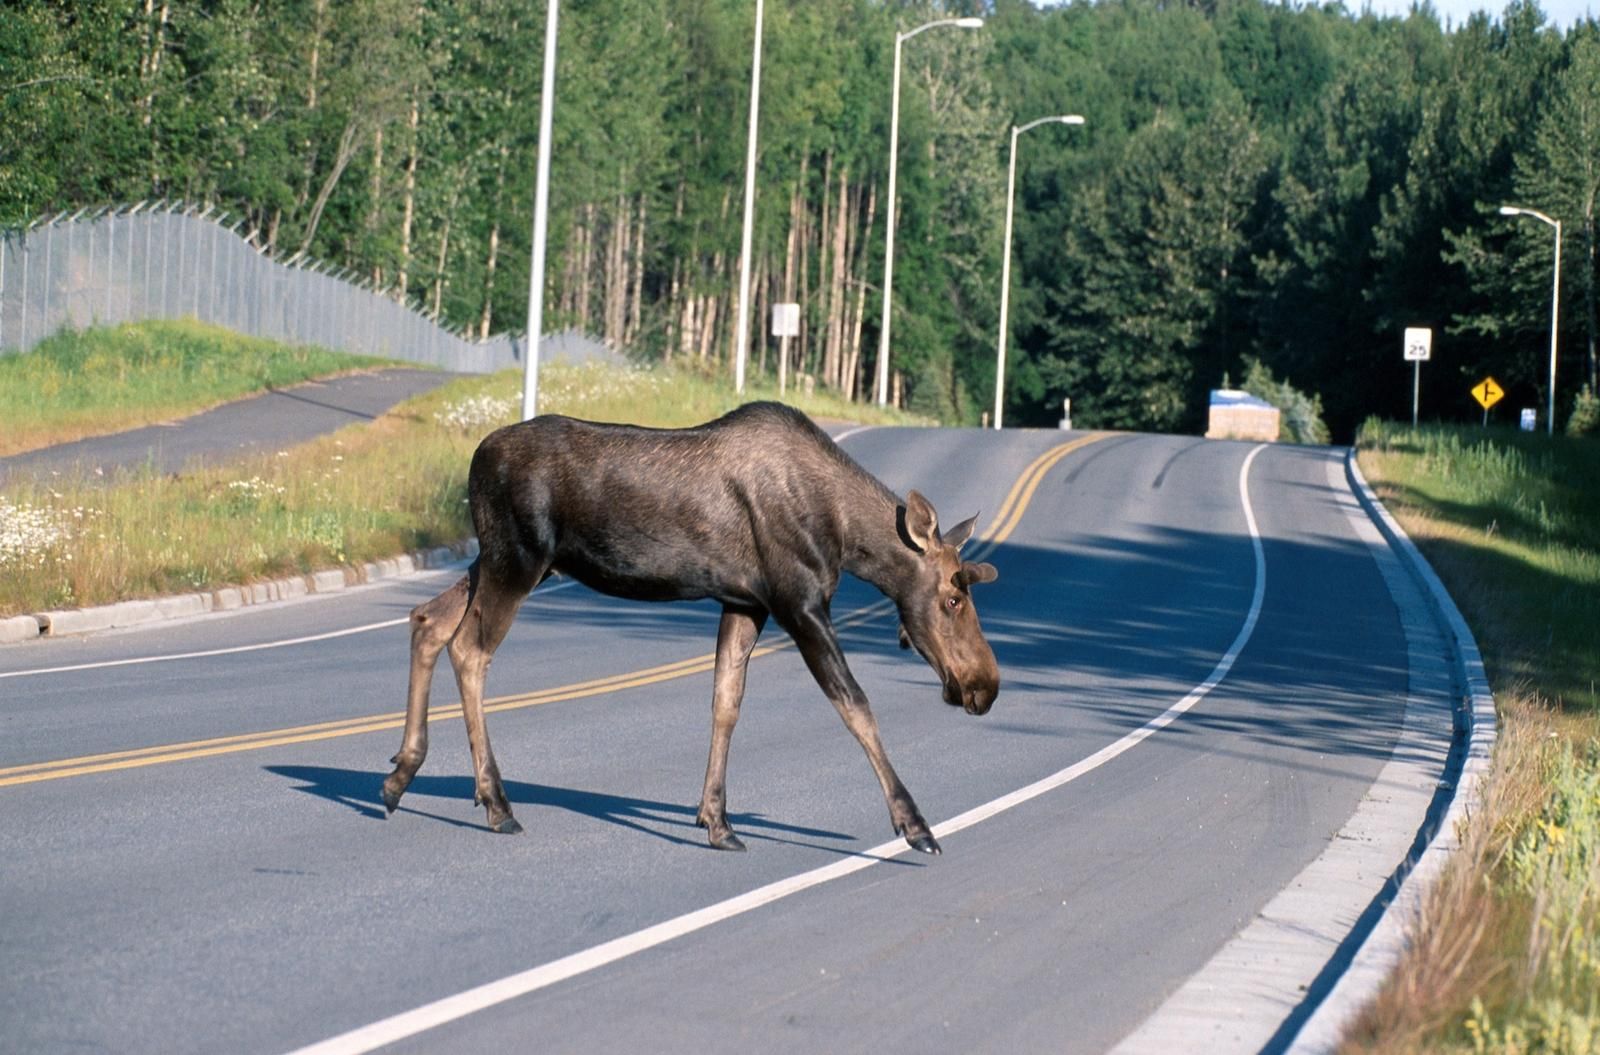 Moose: Not what you want to see as you round a bend